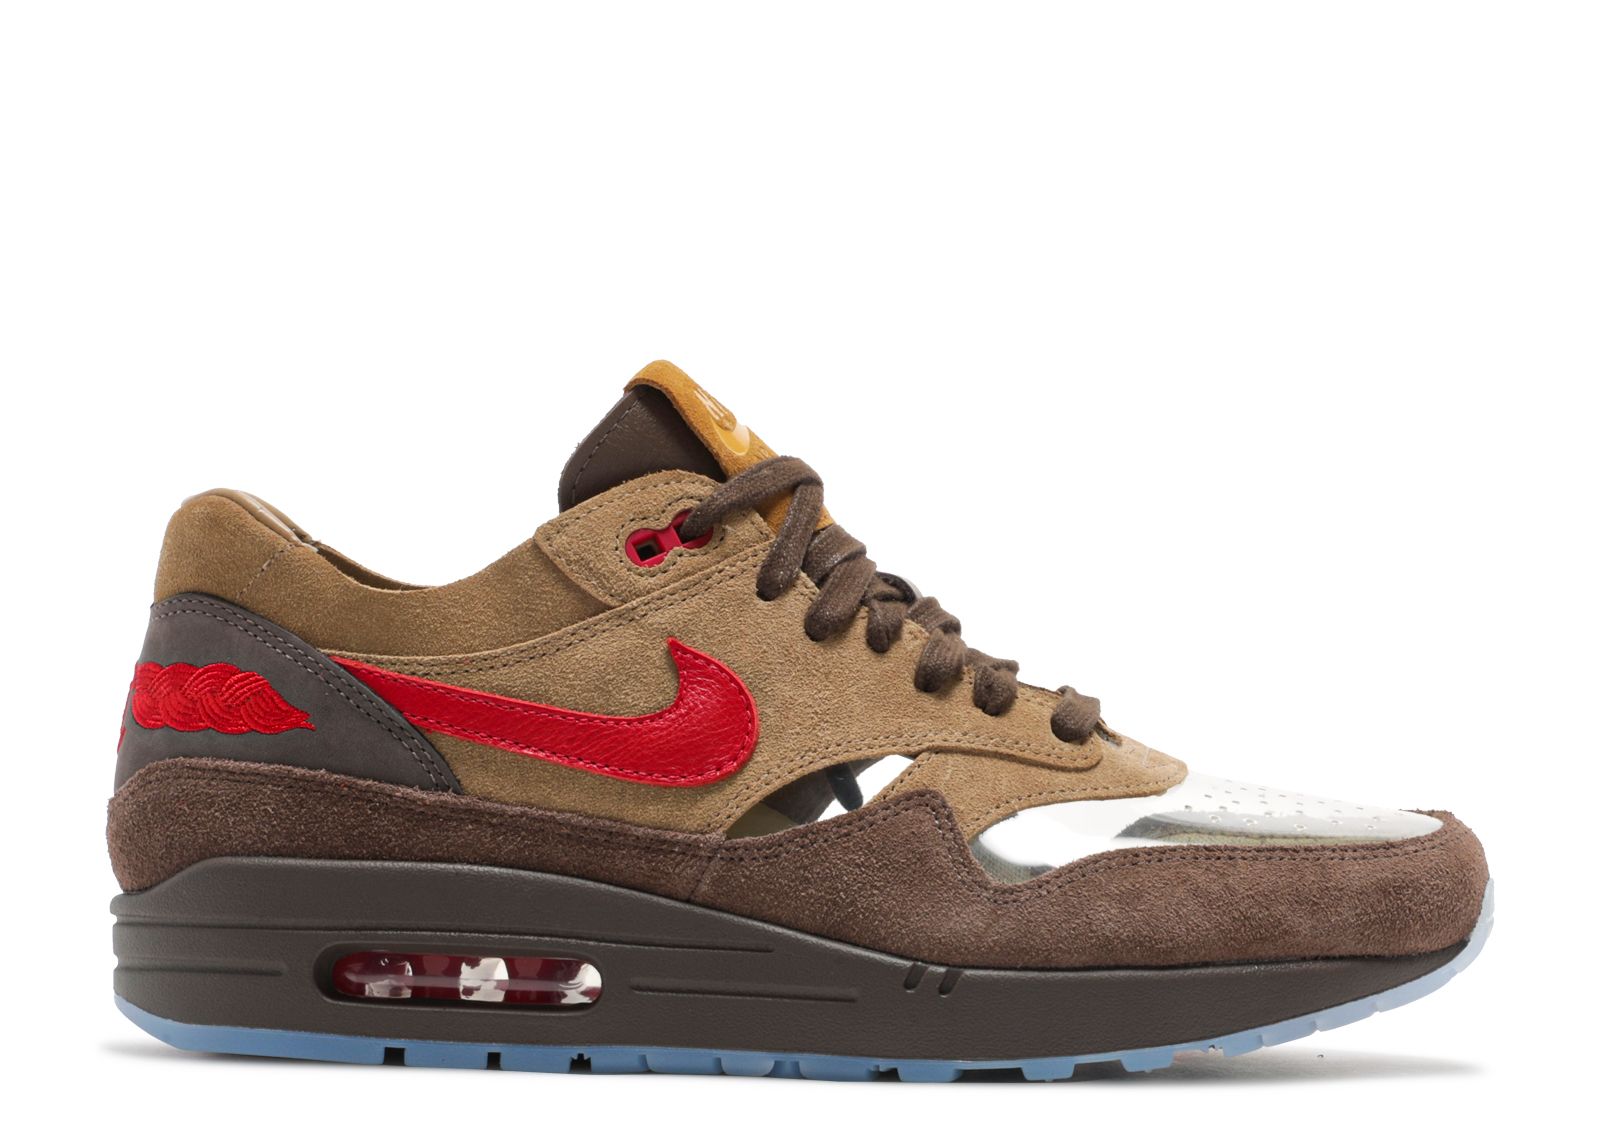 Mansion basic Sovereign Nike Air Max 1 Sneakers | Flight Club